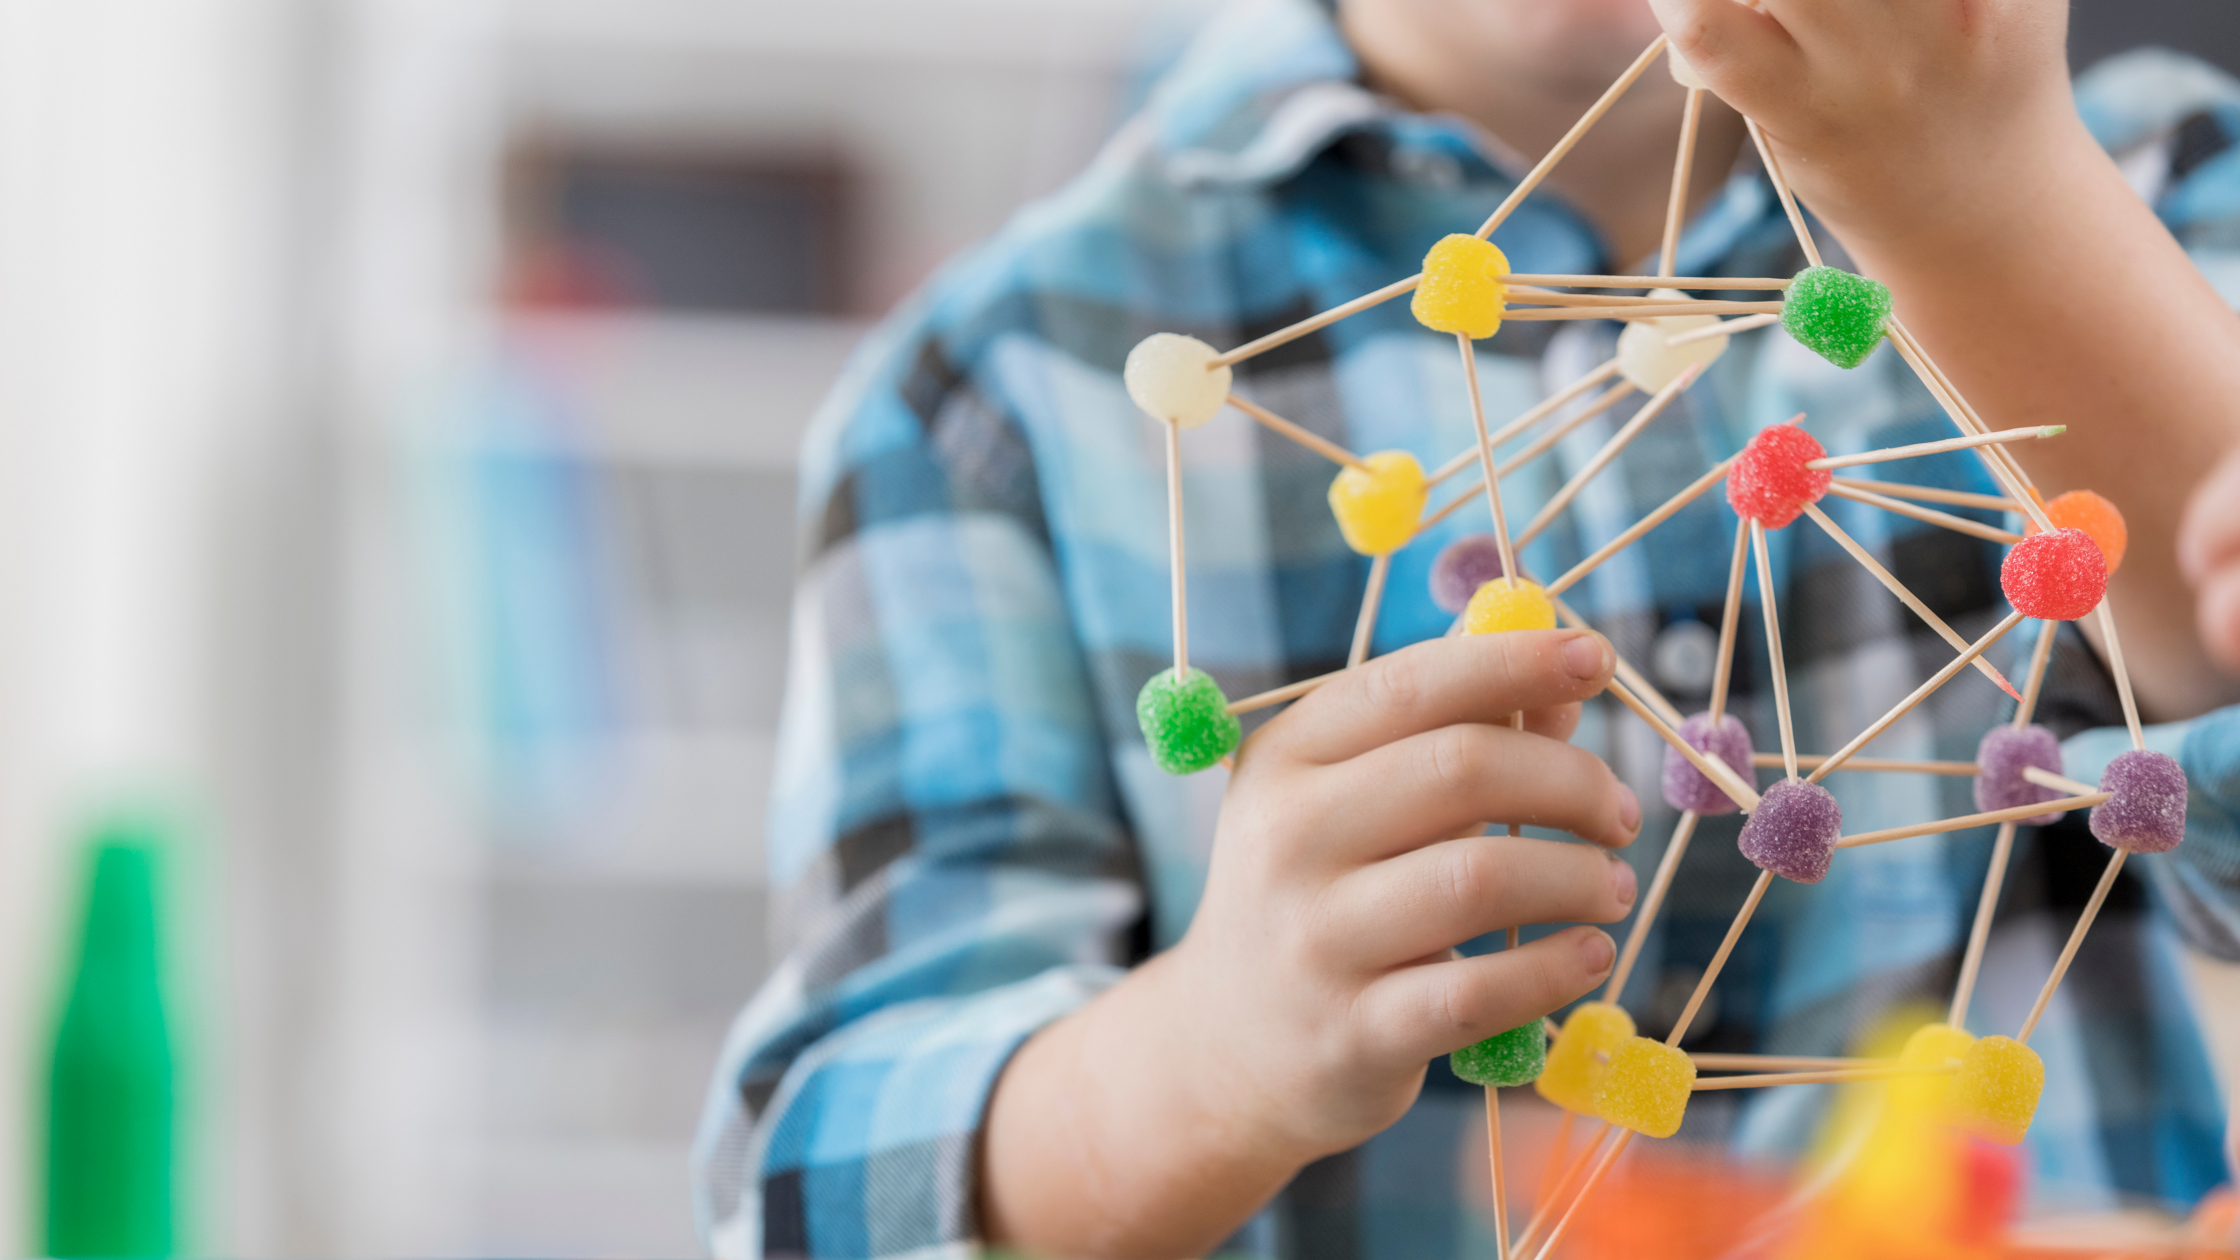 Candy Structures: Fun Engineering STEM Activity for Kids